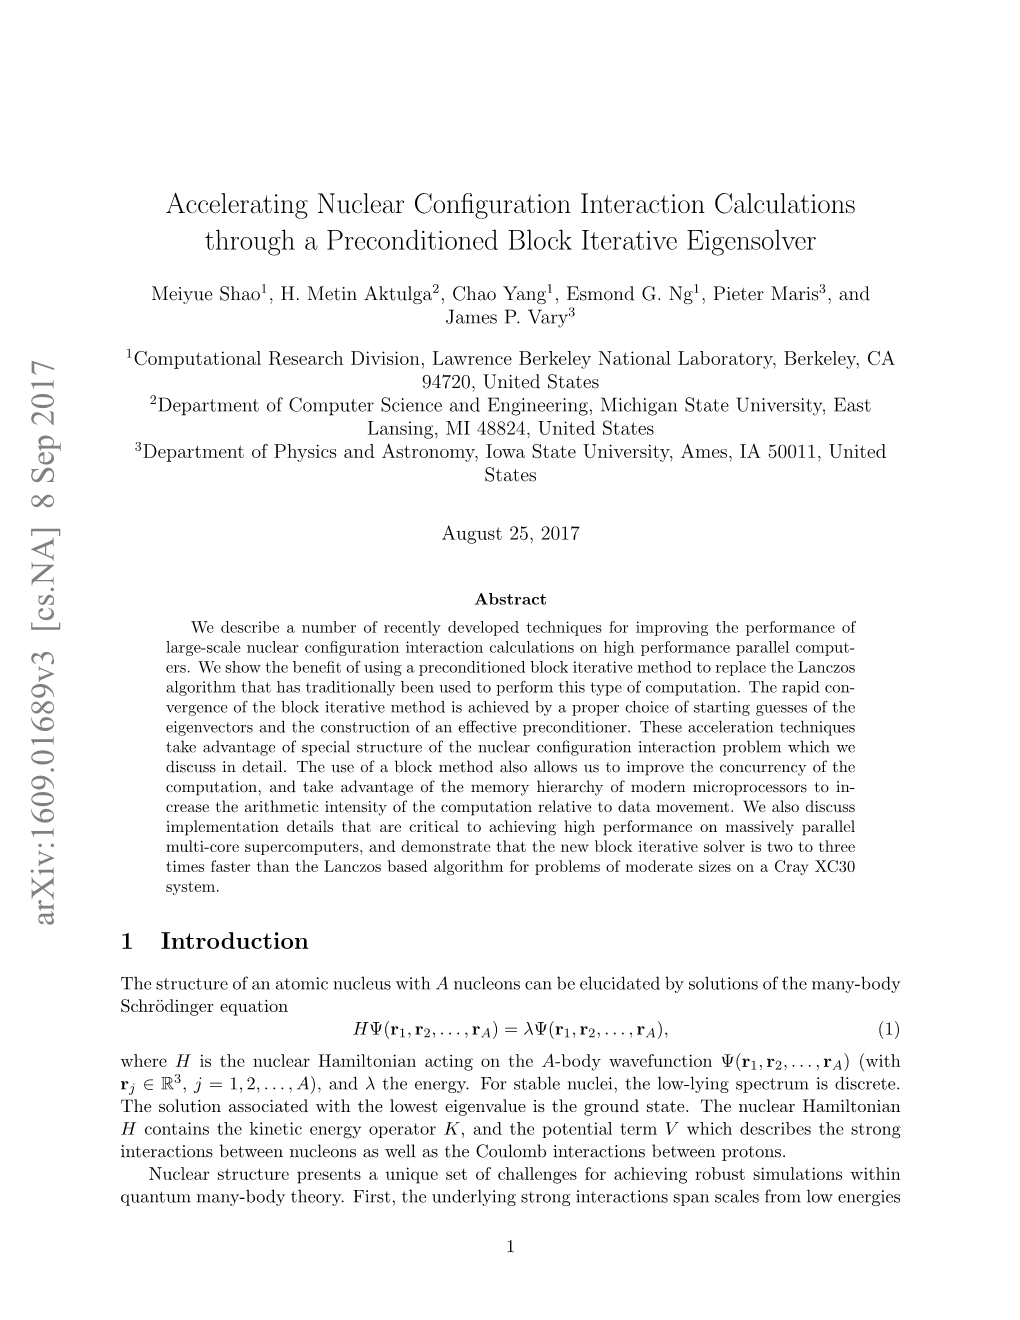 Accelerating Nuclear Configuration Interaction Calculations Through a Preconditioned Block Iterative Eigensolver